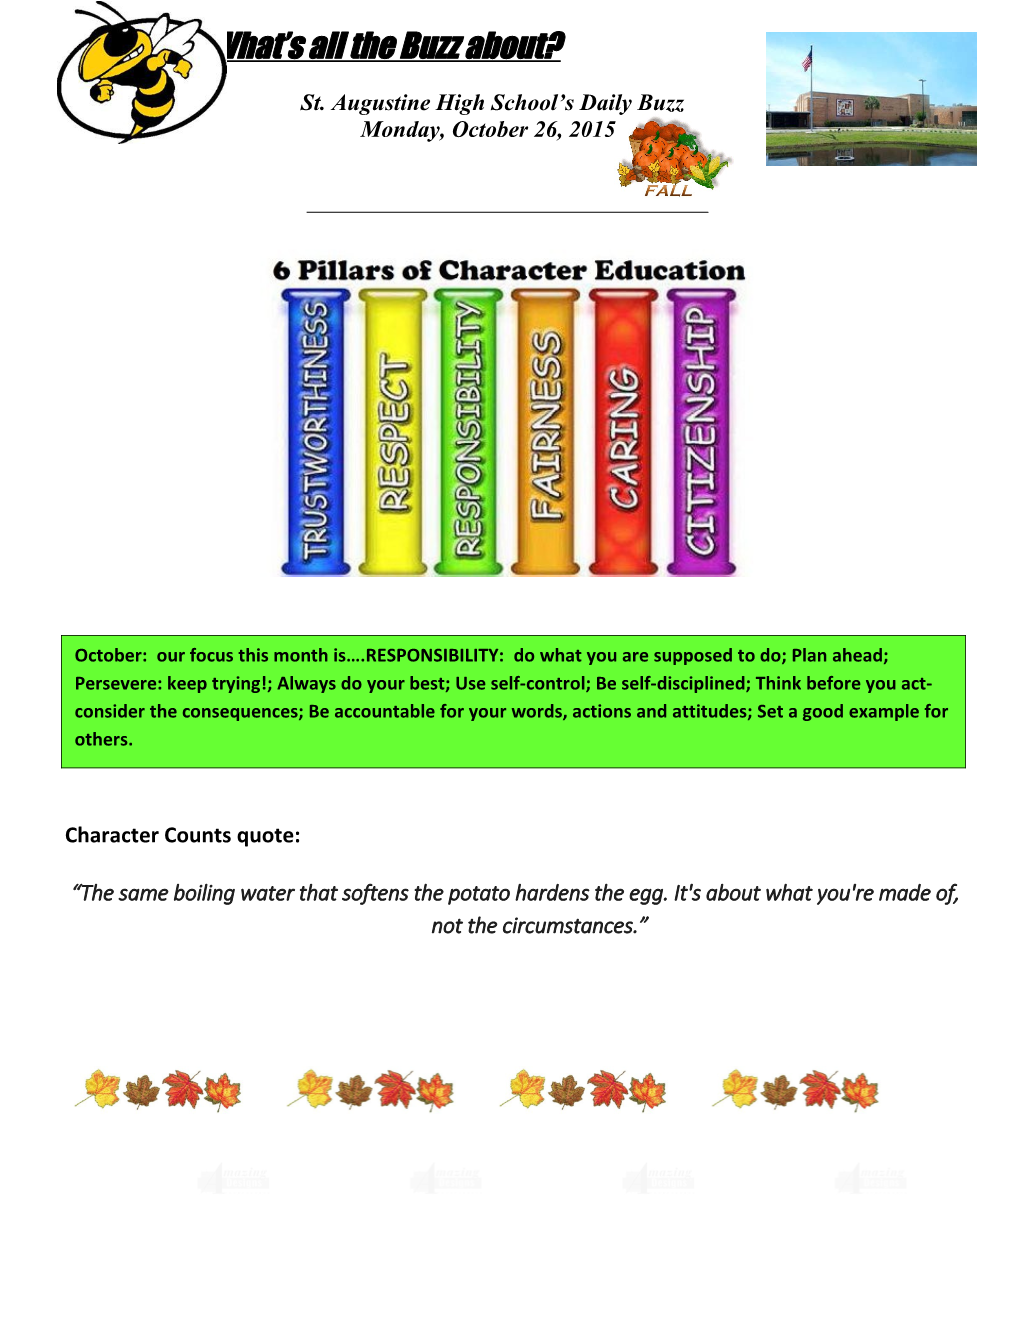 Character Counts Quote